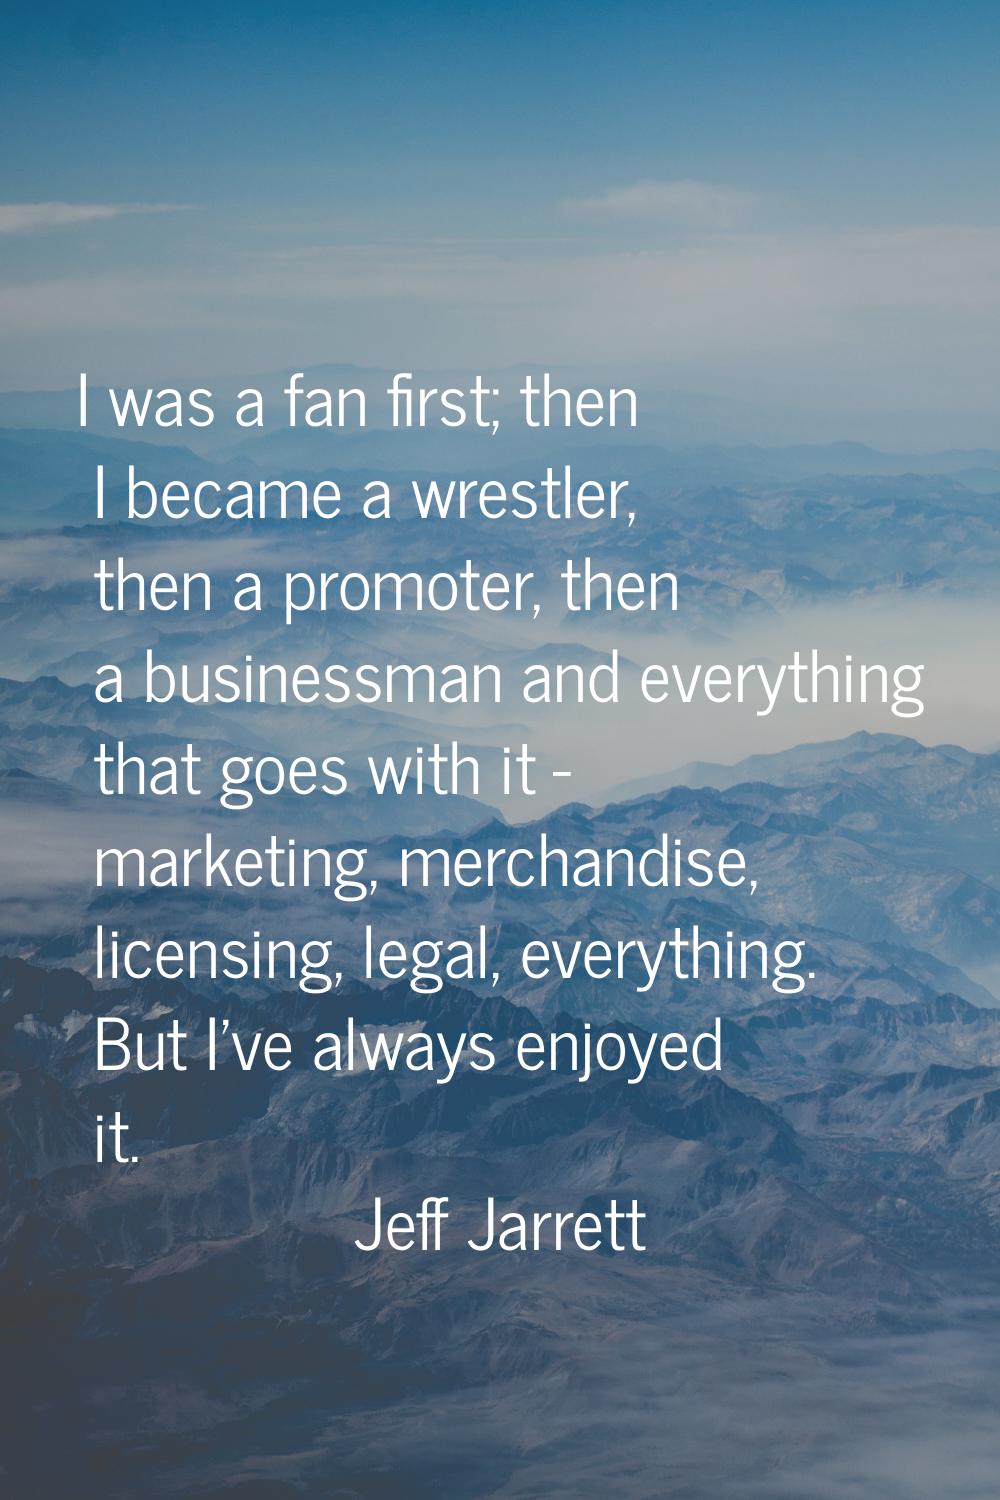 I was a fan first; then I became a wrestler, then a promoter, then a businessman and everything tha